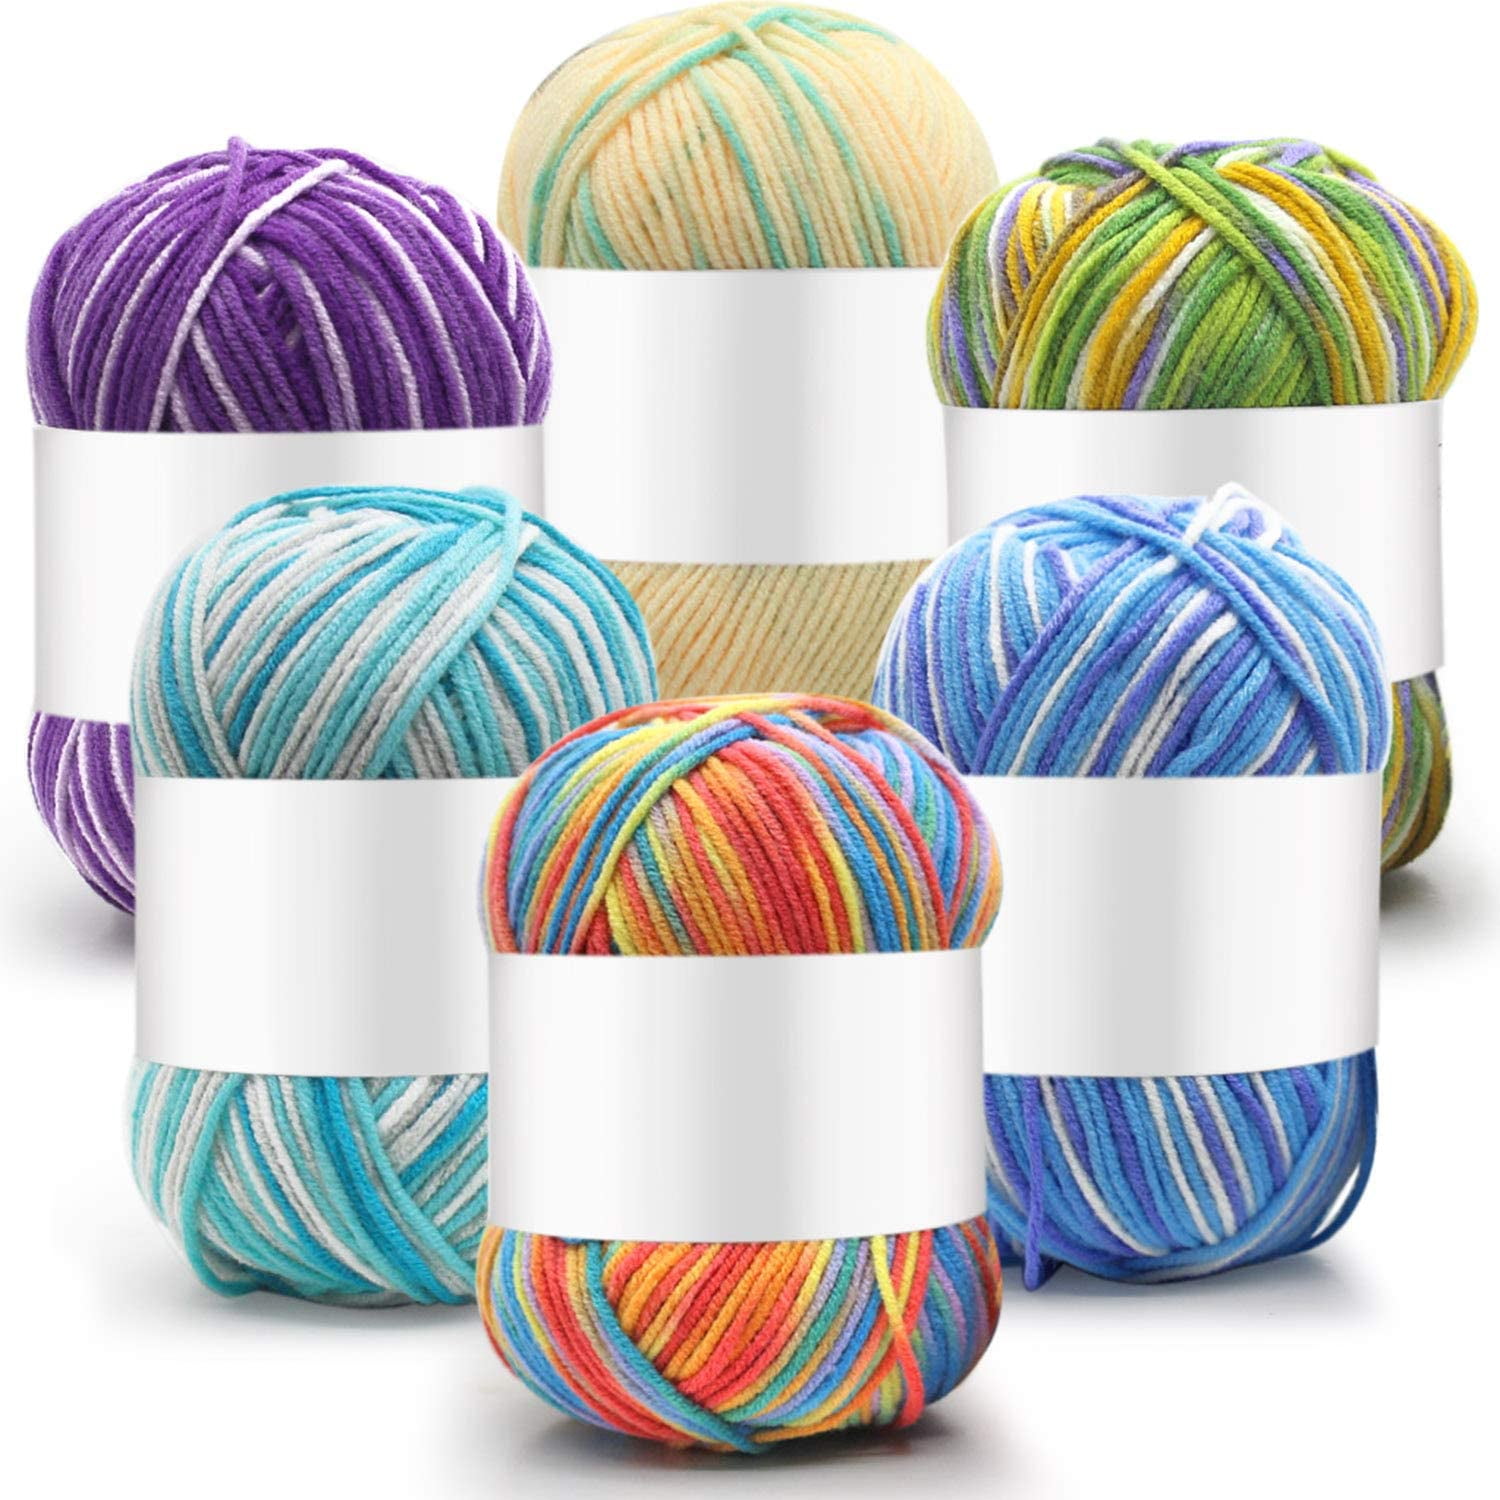 Amigurumi Select 100% Acrylic Craft Yarn - Crochet and Knitting Projects -  Shades of Contrast Colors A - 4 x 50g Skeins Total 500 yds.